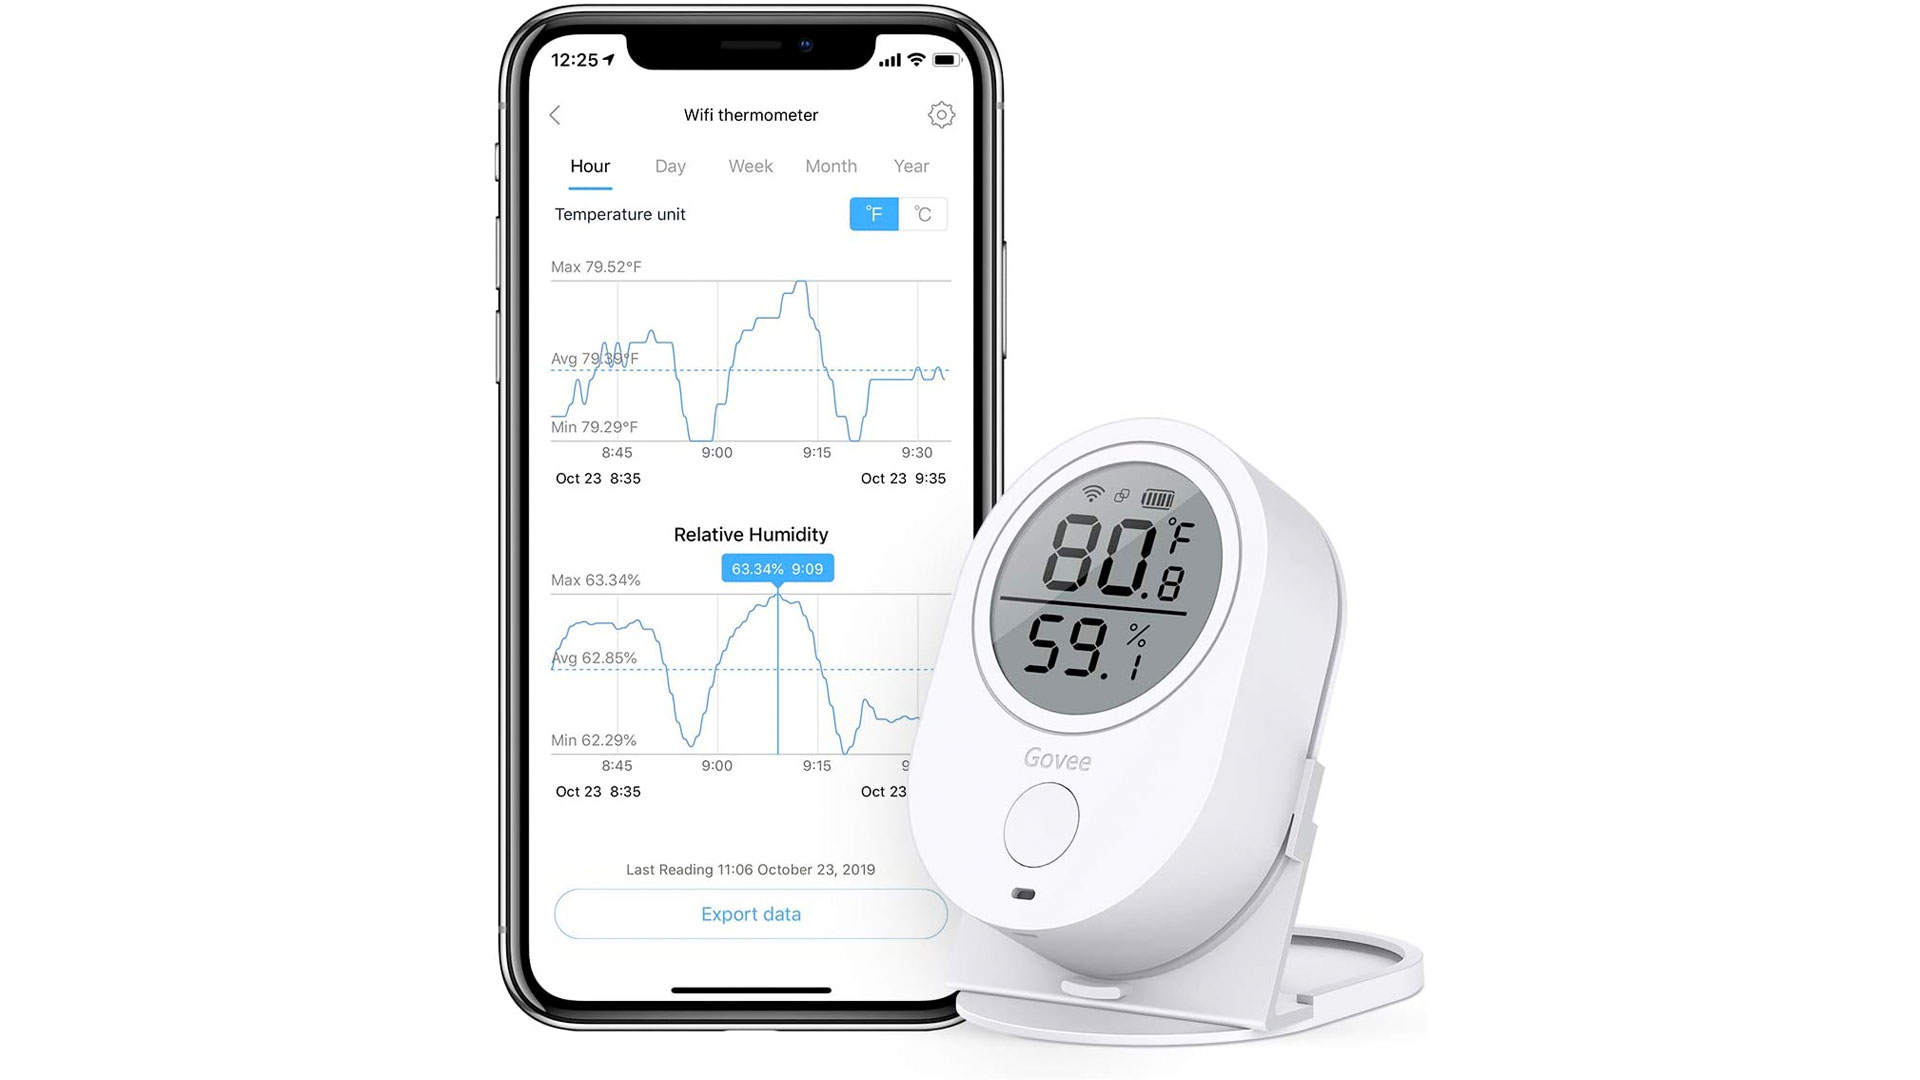 Govee Wi-Fi and Bluetooth thermometer/hygrometers can work with